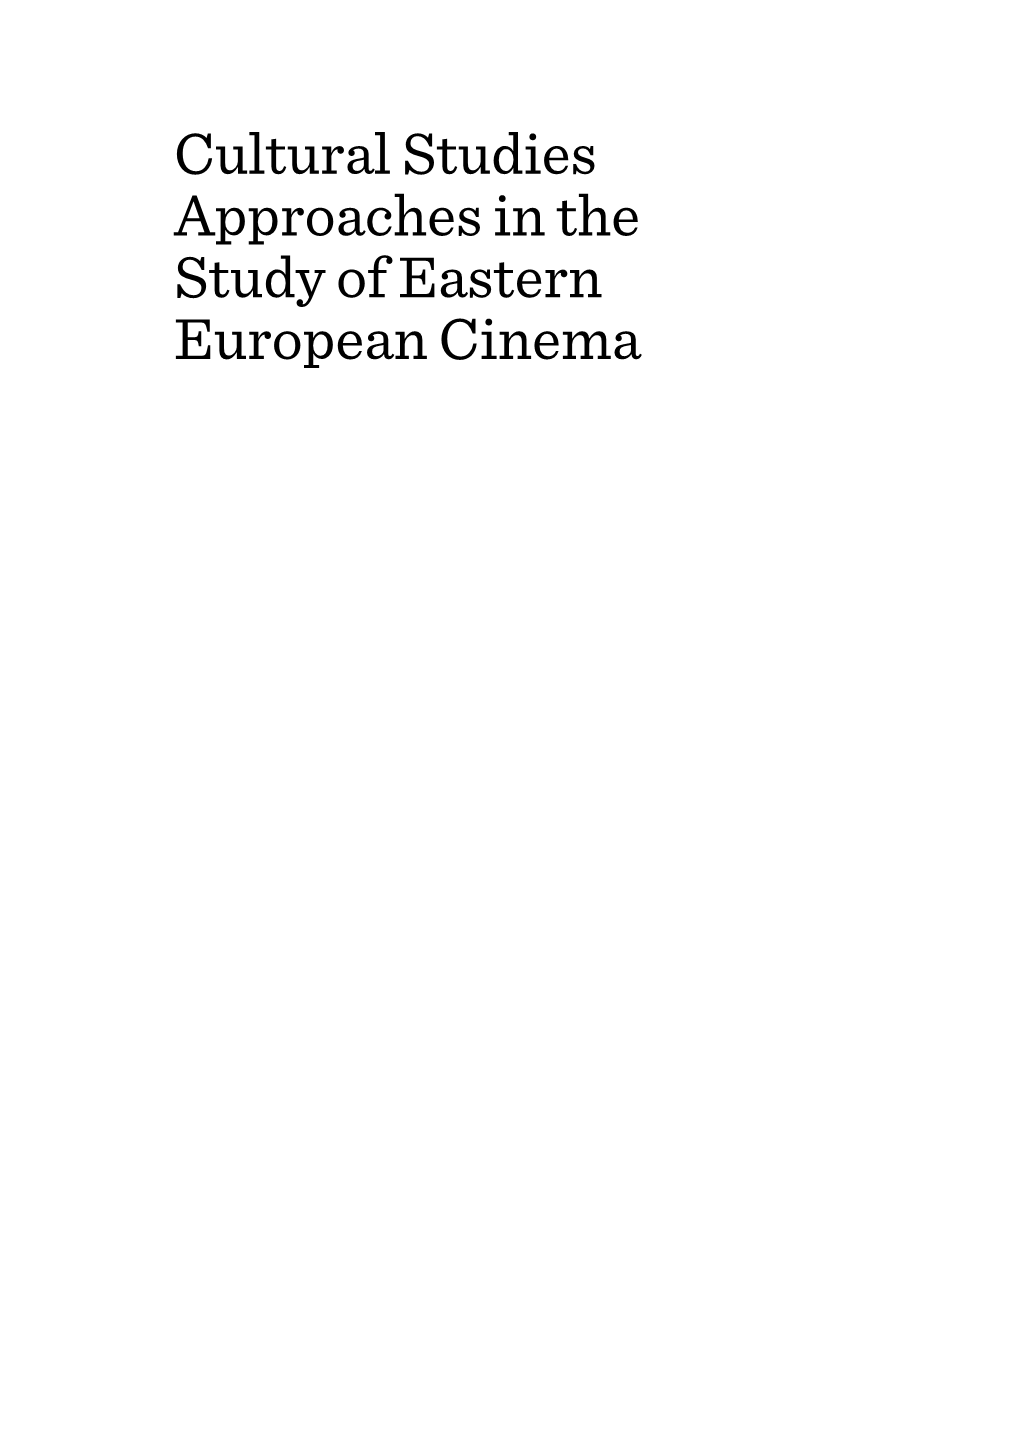 Cultural Studies Approaches in the Study of Eastern European Cinema